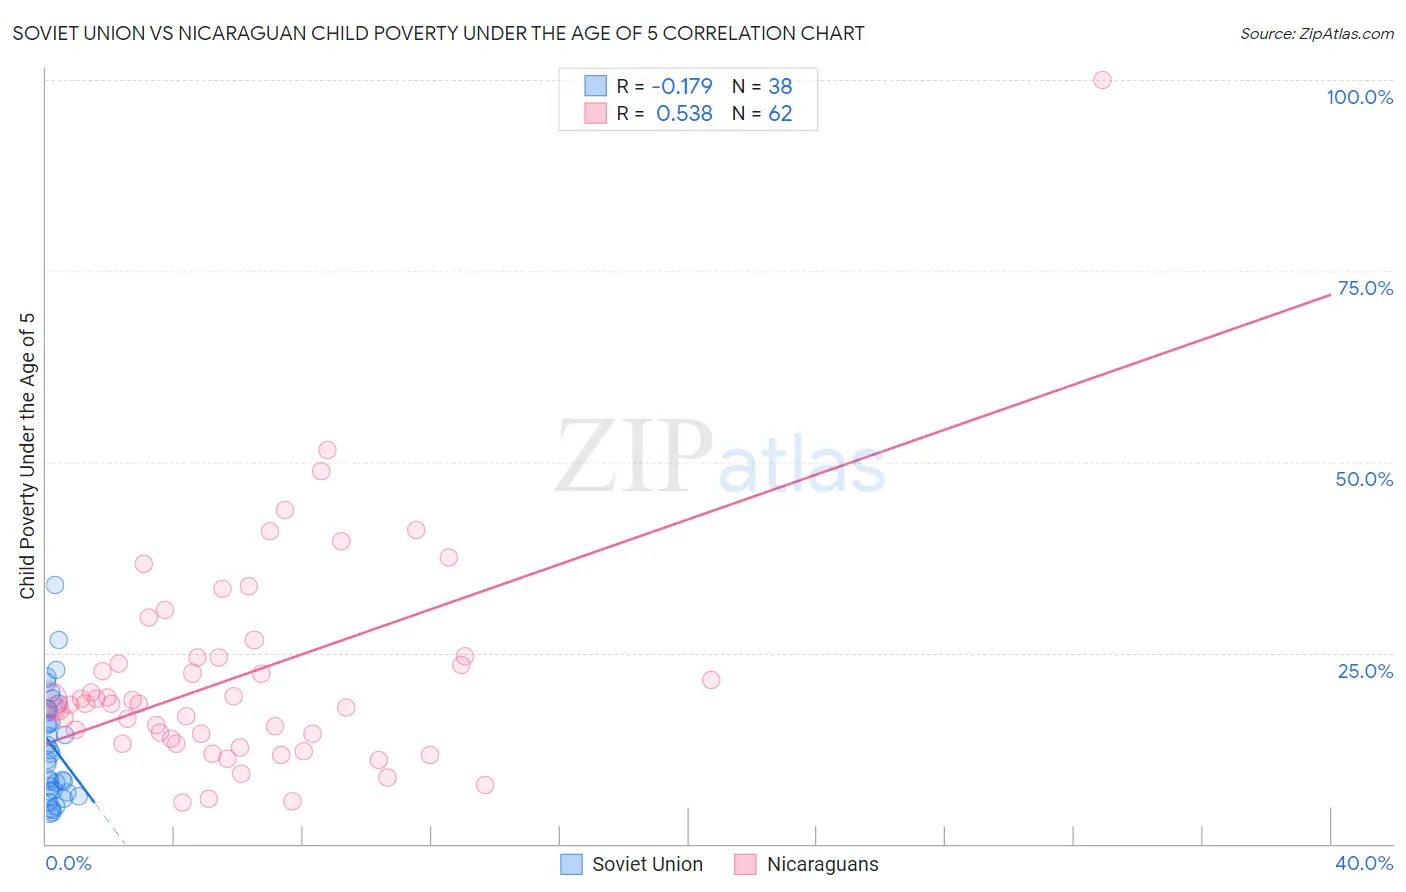 Soviet Union vs Nicaraguan Child Poverty Under the Age of 5